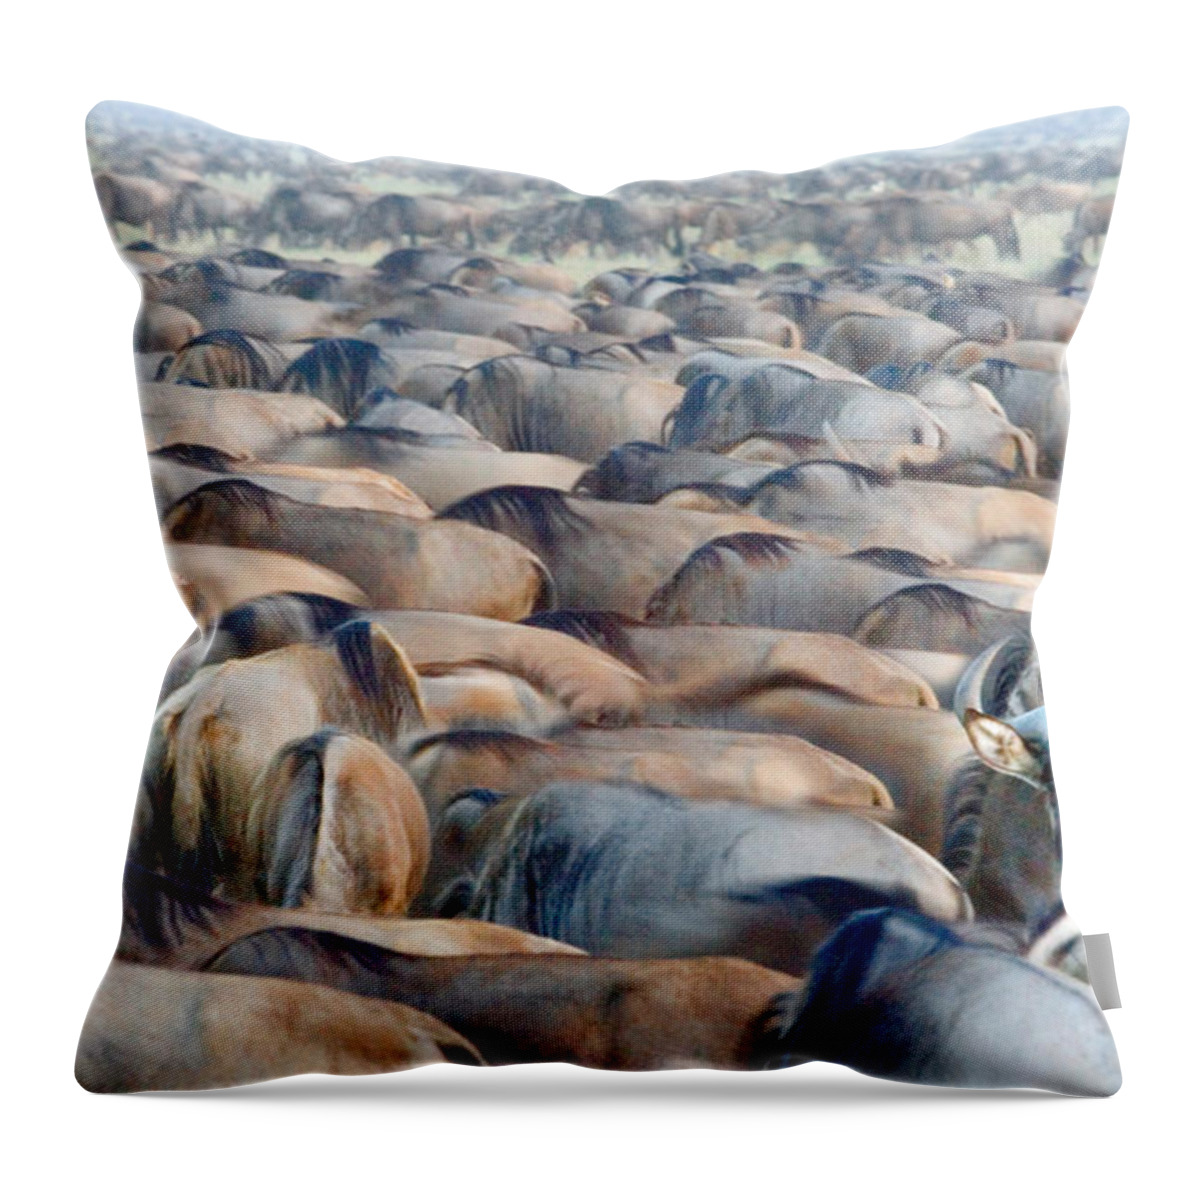 Photography Throw Pillow featuring the photograph Herd Of Wildebeests In A Field by Panoramic Images